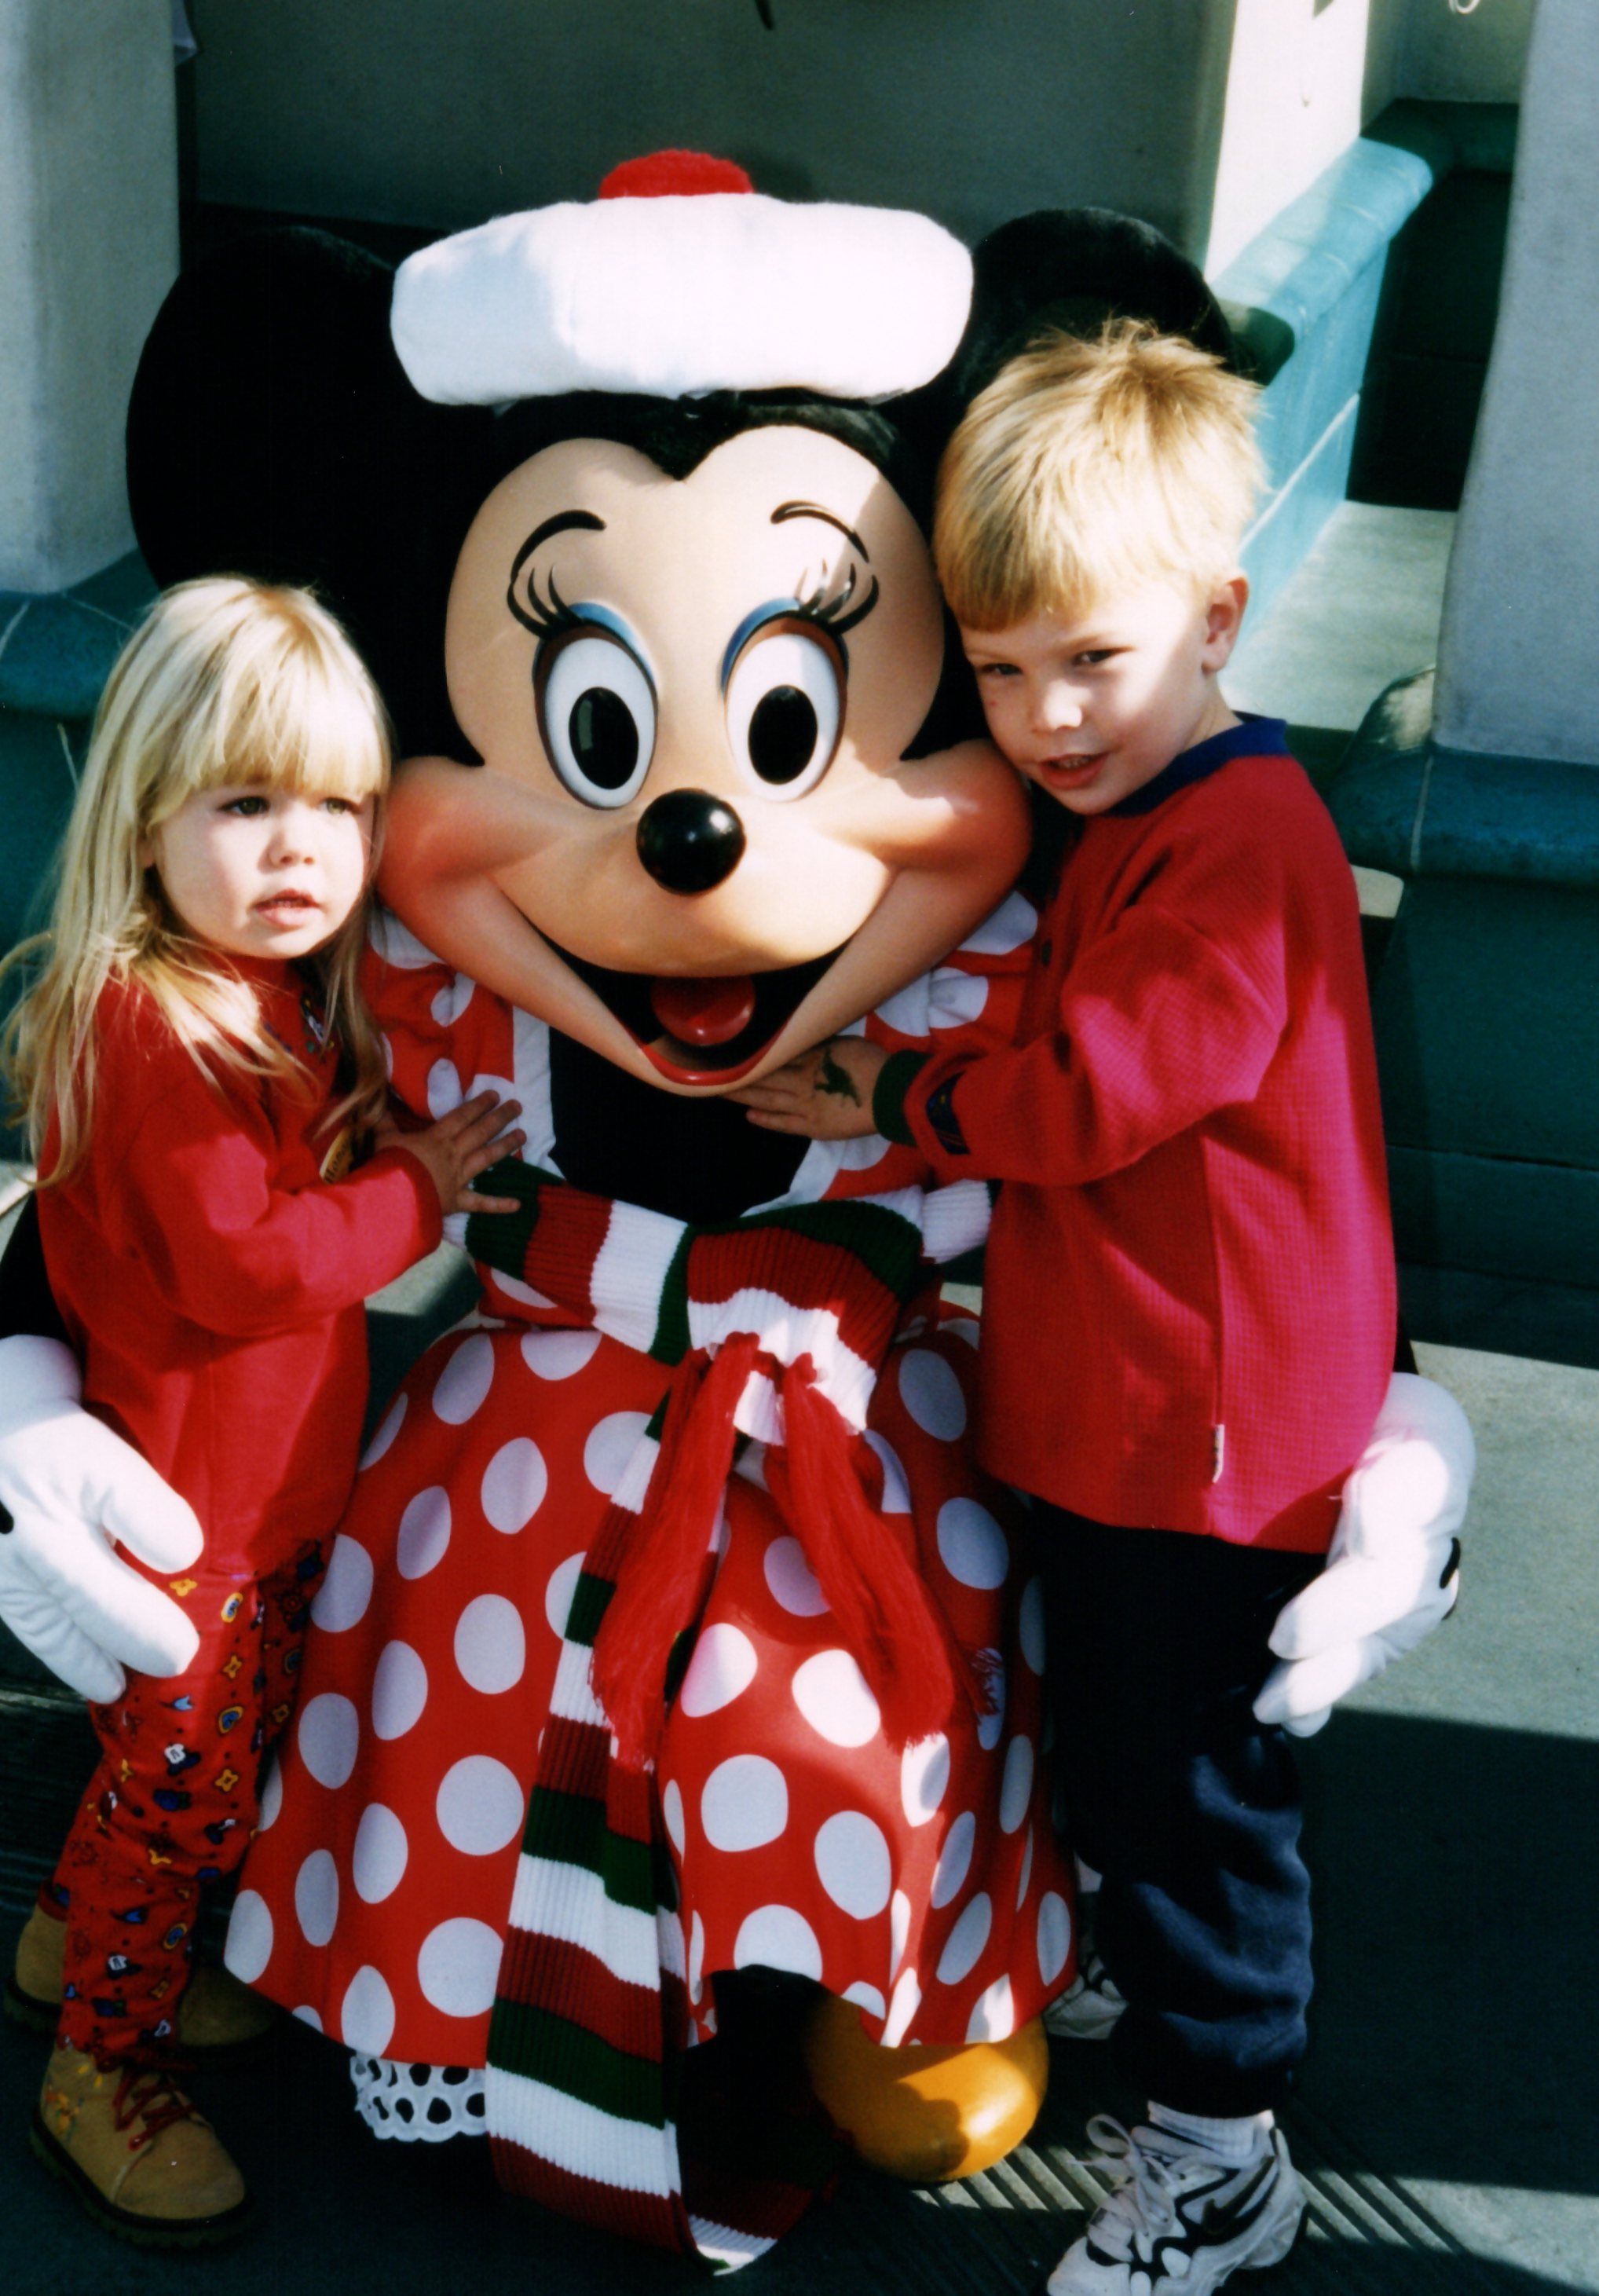 Austin & David with Minnie Mouse